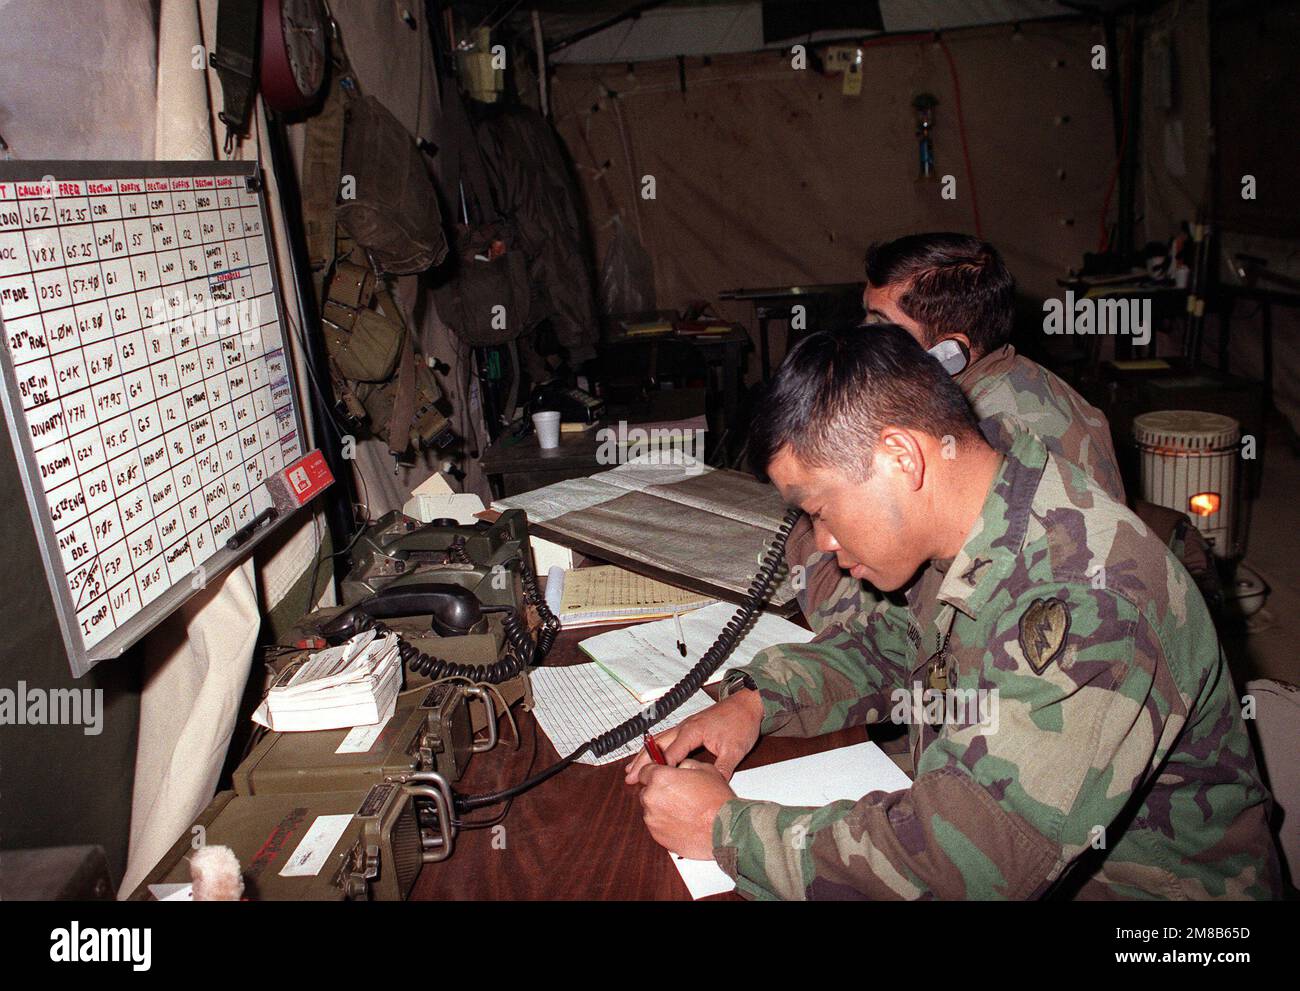 LTC Ted W. Hashimoto, Commanding Officer, Military Police Battalion, 25th  Infantry Division (Light) works in his battalion's tactical operations  center during the joint South Korean/U.S. exercise Team Spirit '89. The  soldiers are